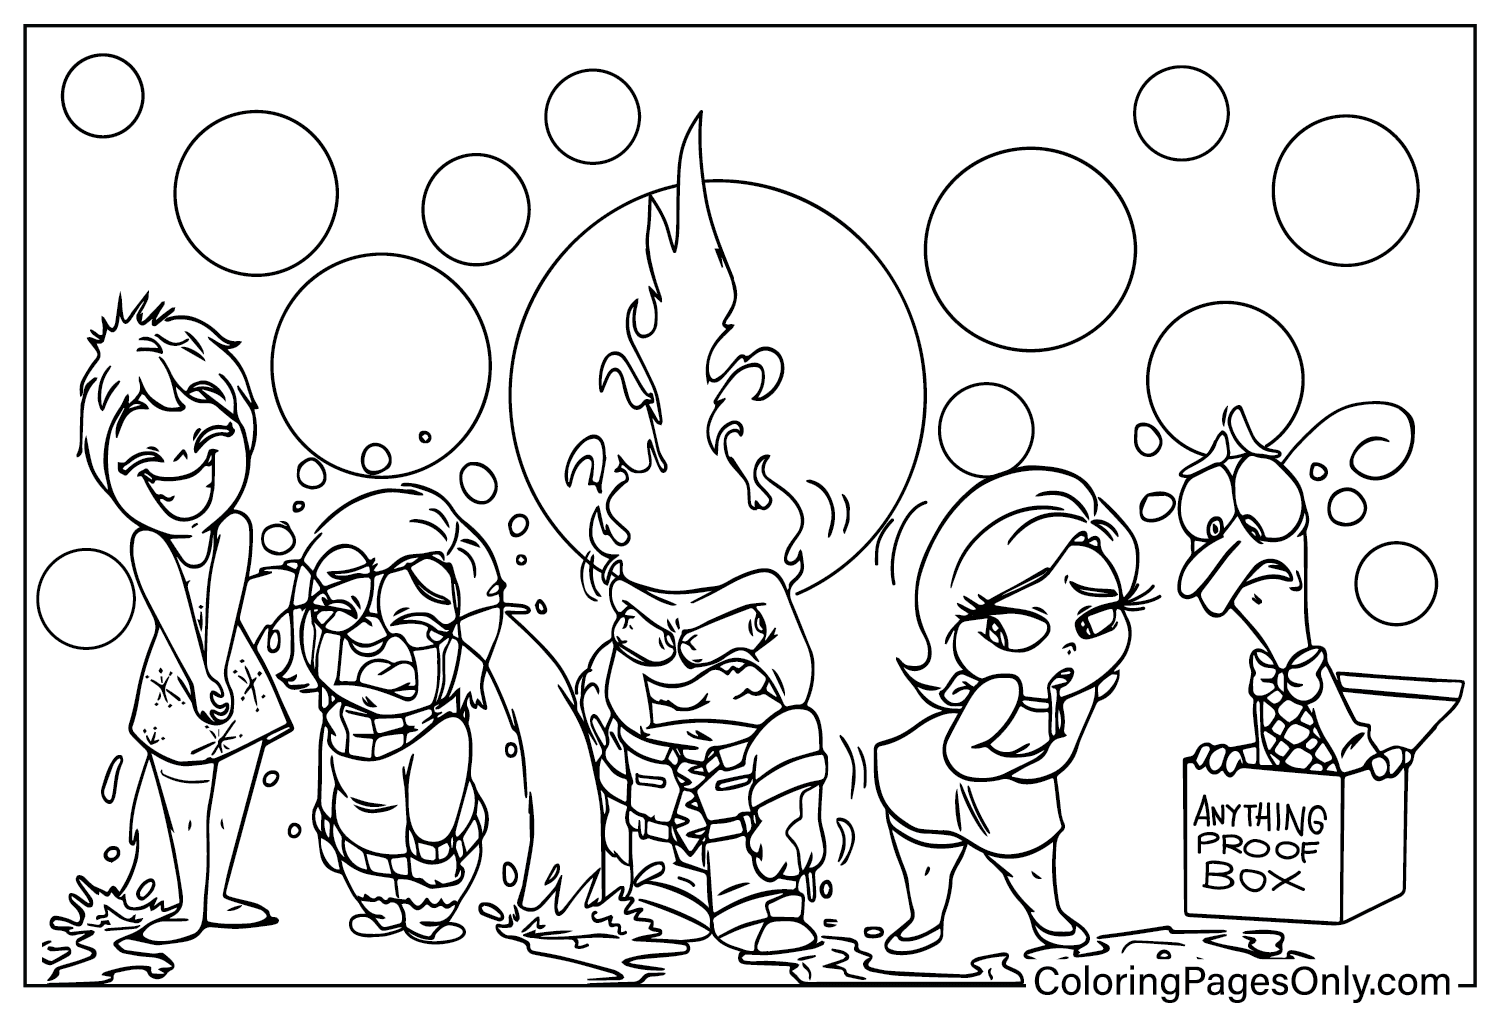 Inside Out 2 Coloring Sheet from Inside Out 2